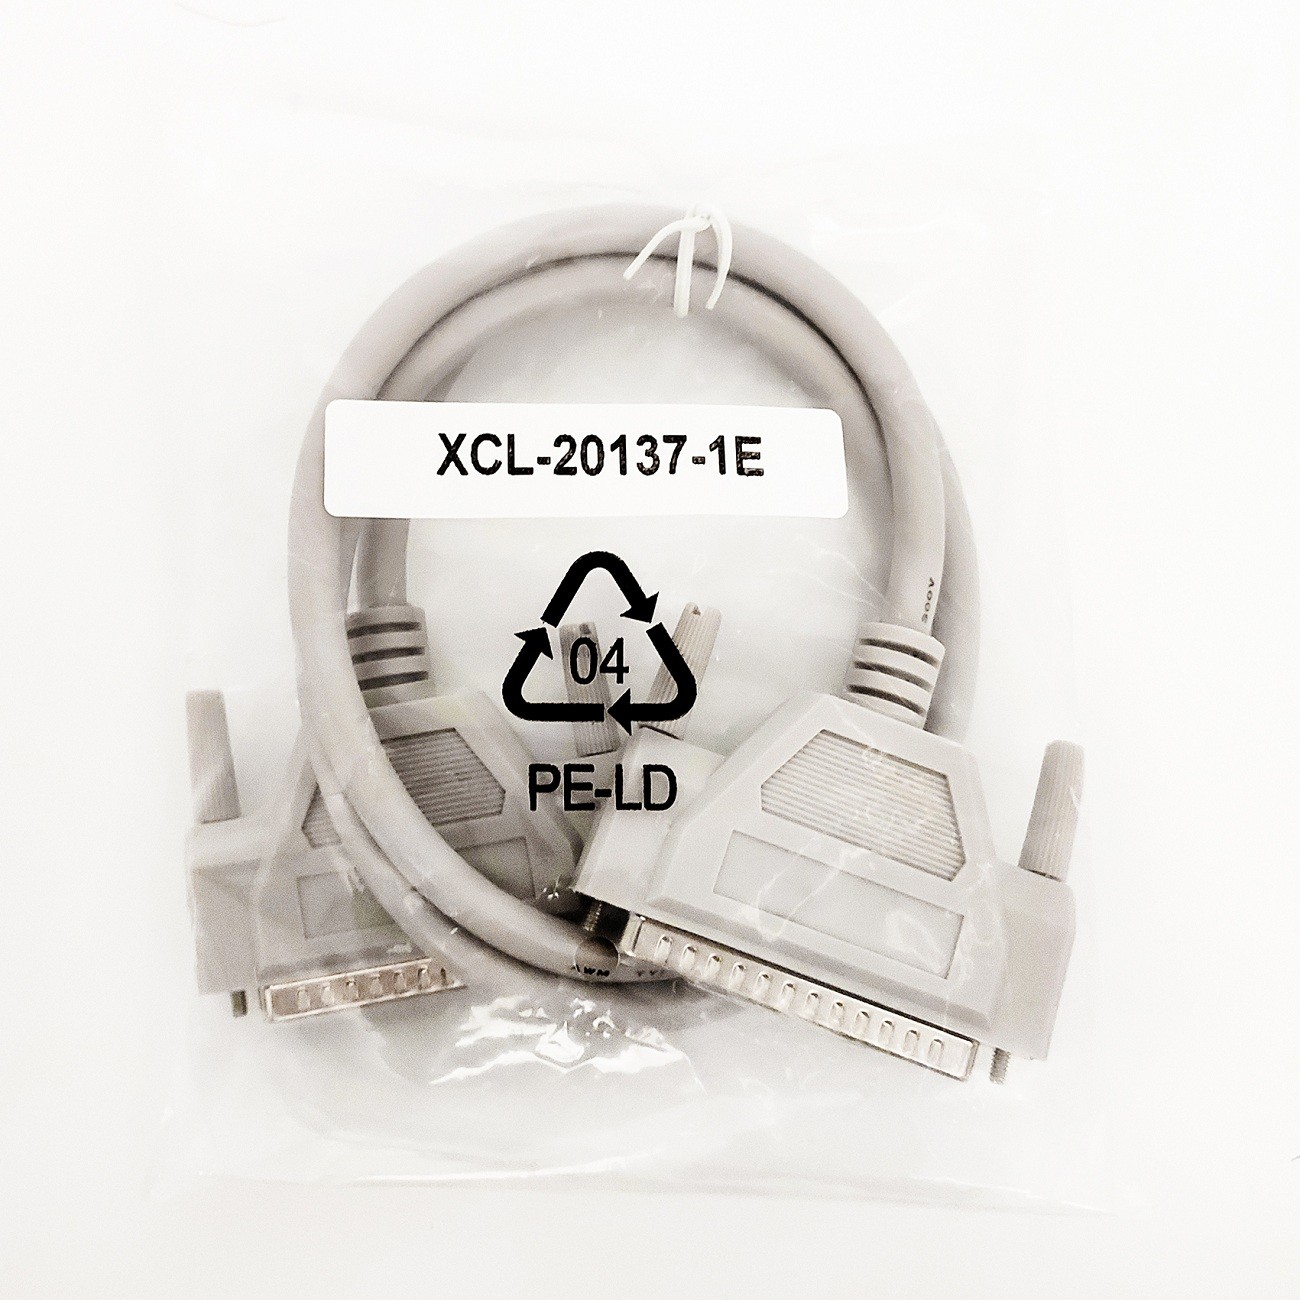 XCL-20137